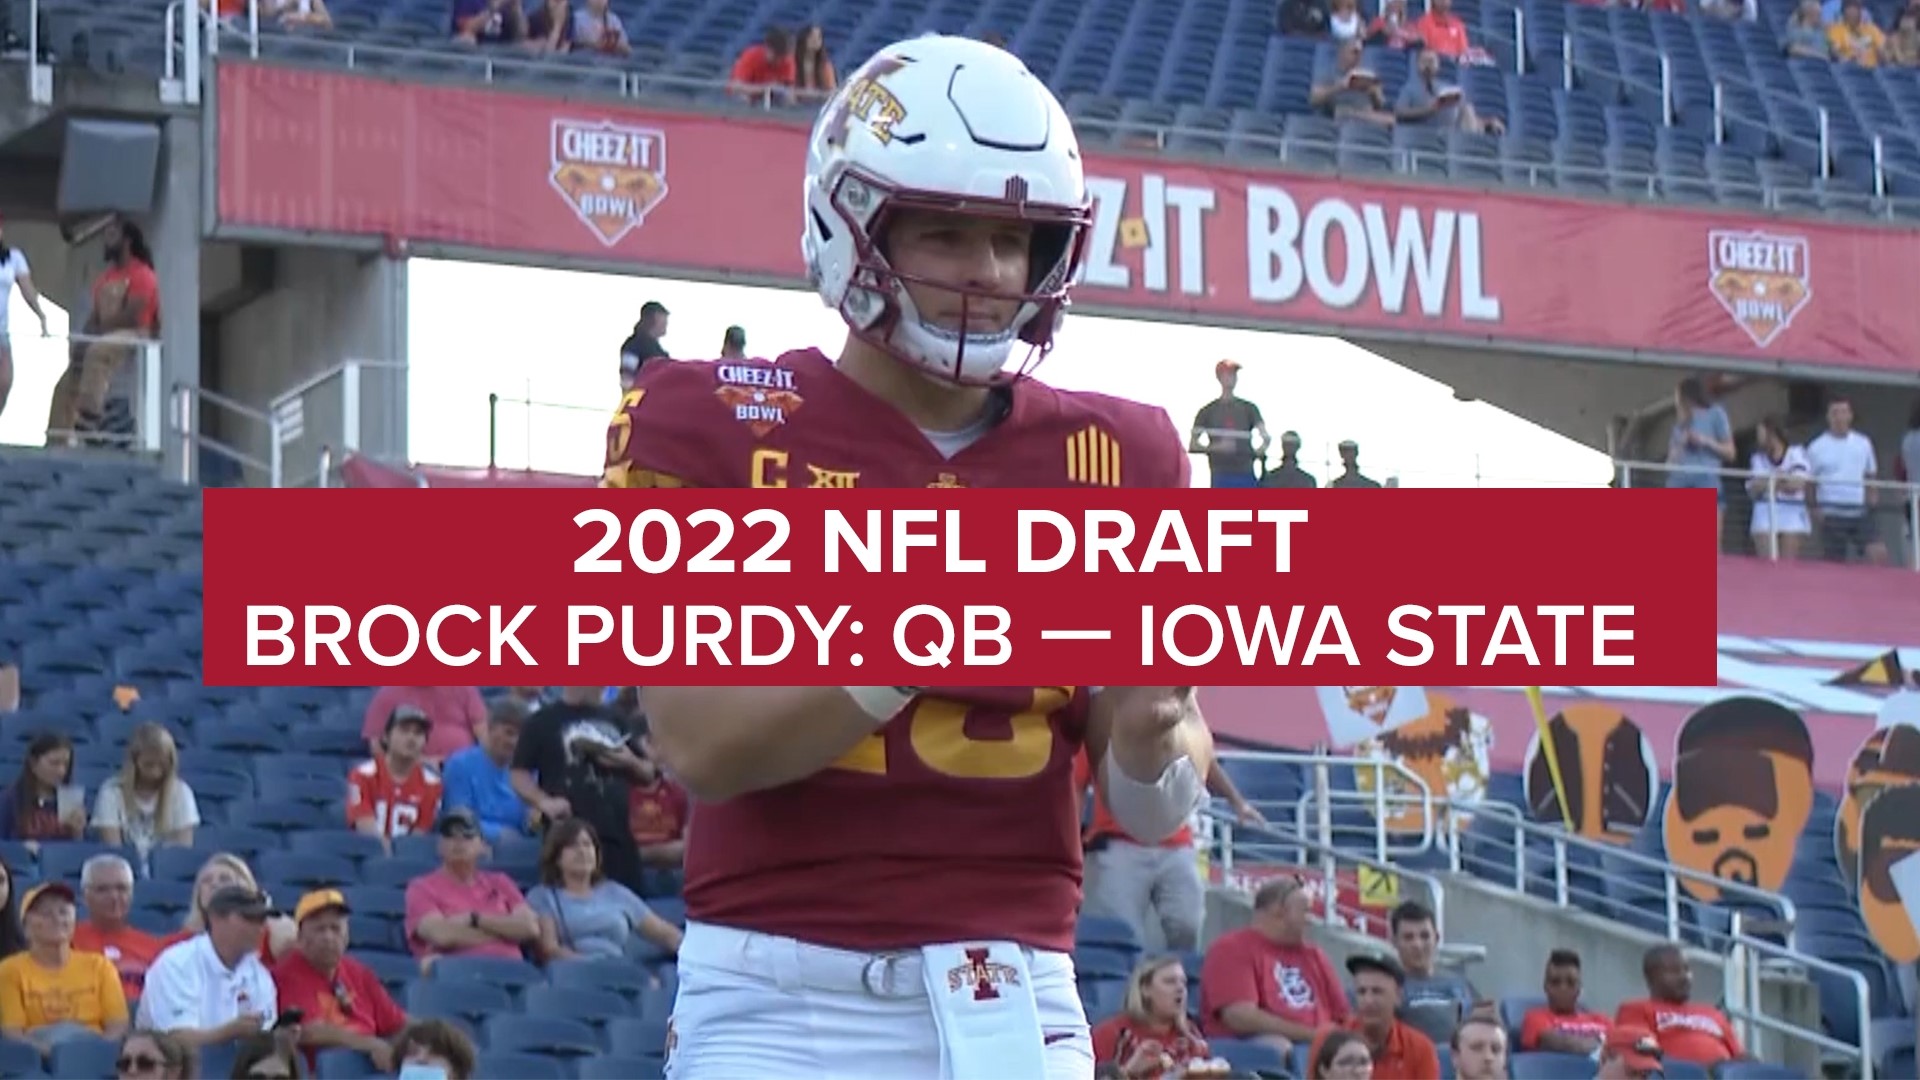 From taking over mid-season as a freshman, Brock Purdy has compiled one of, if not the best, collegiate career by an Iowa State quarterback.